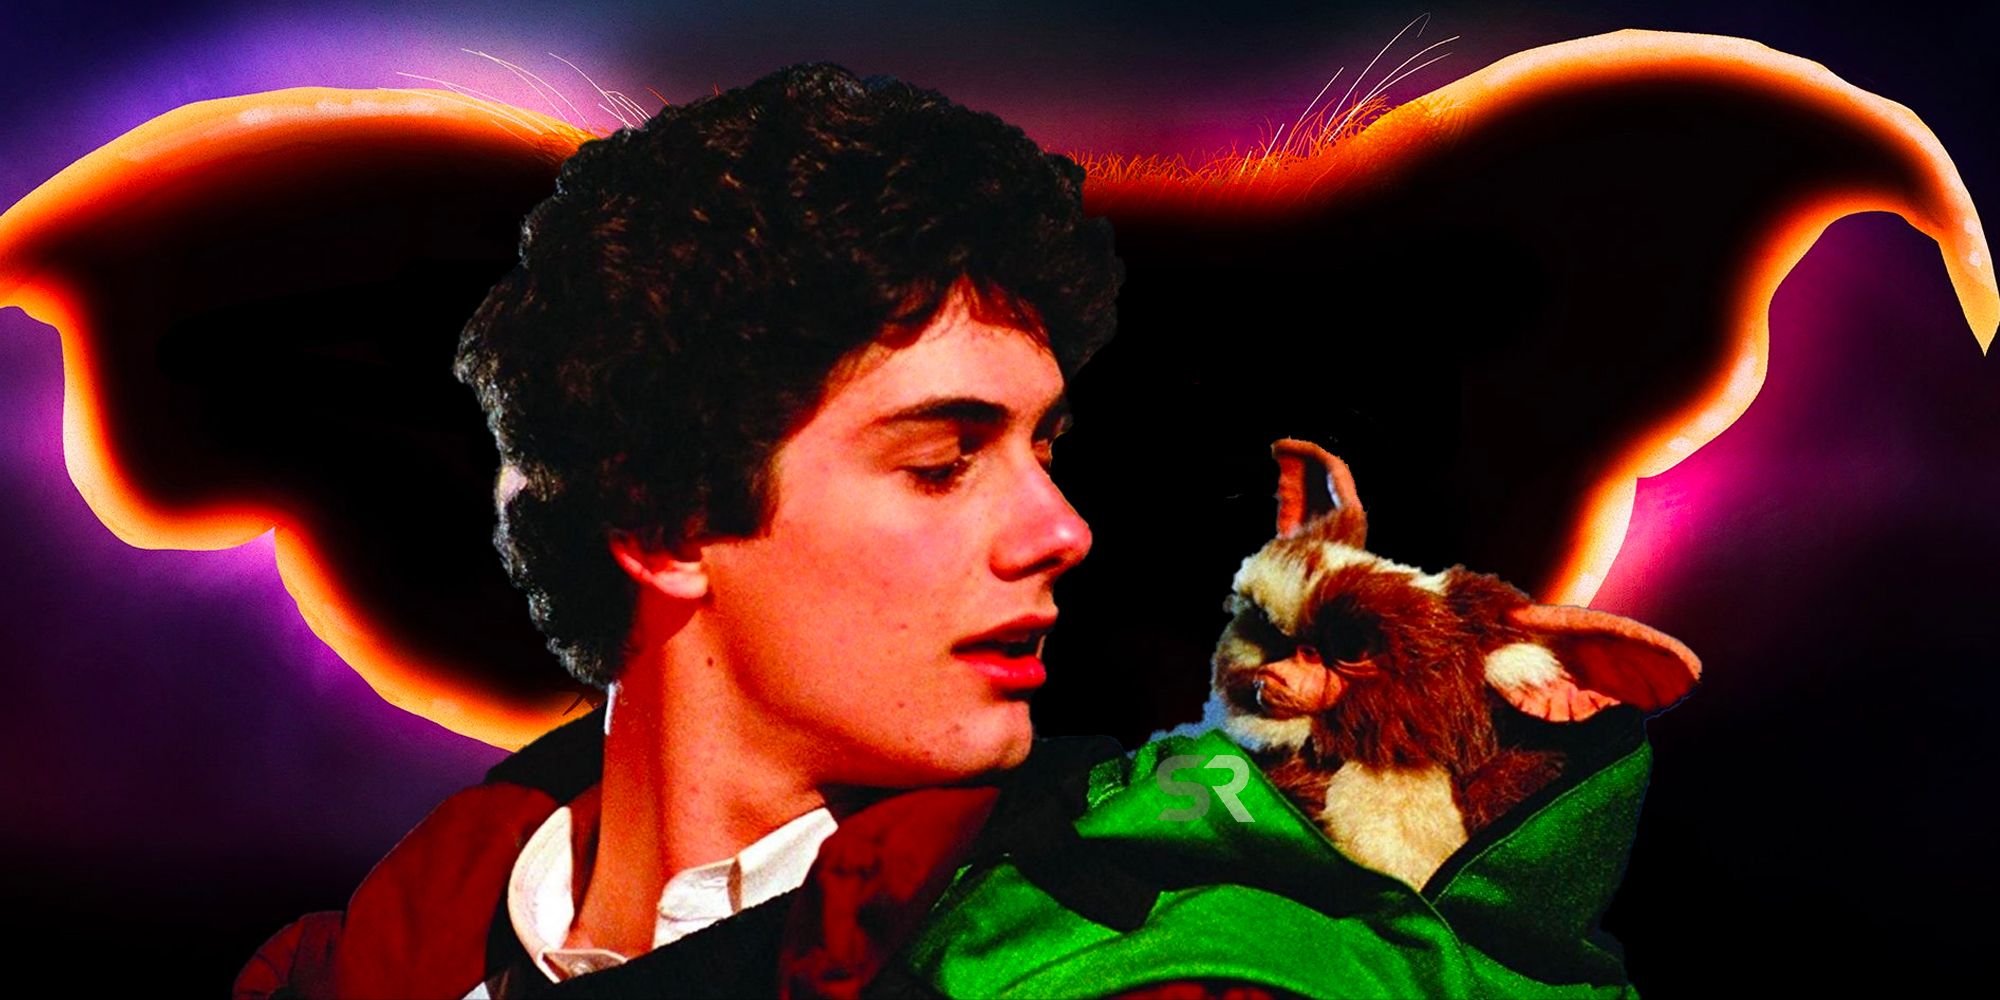 Gremlins TV Show Will Have Cameos From Original Movie Stars